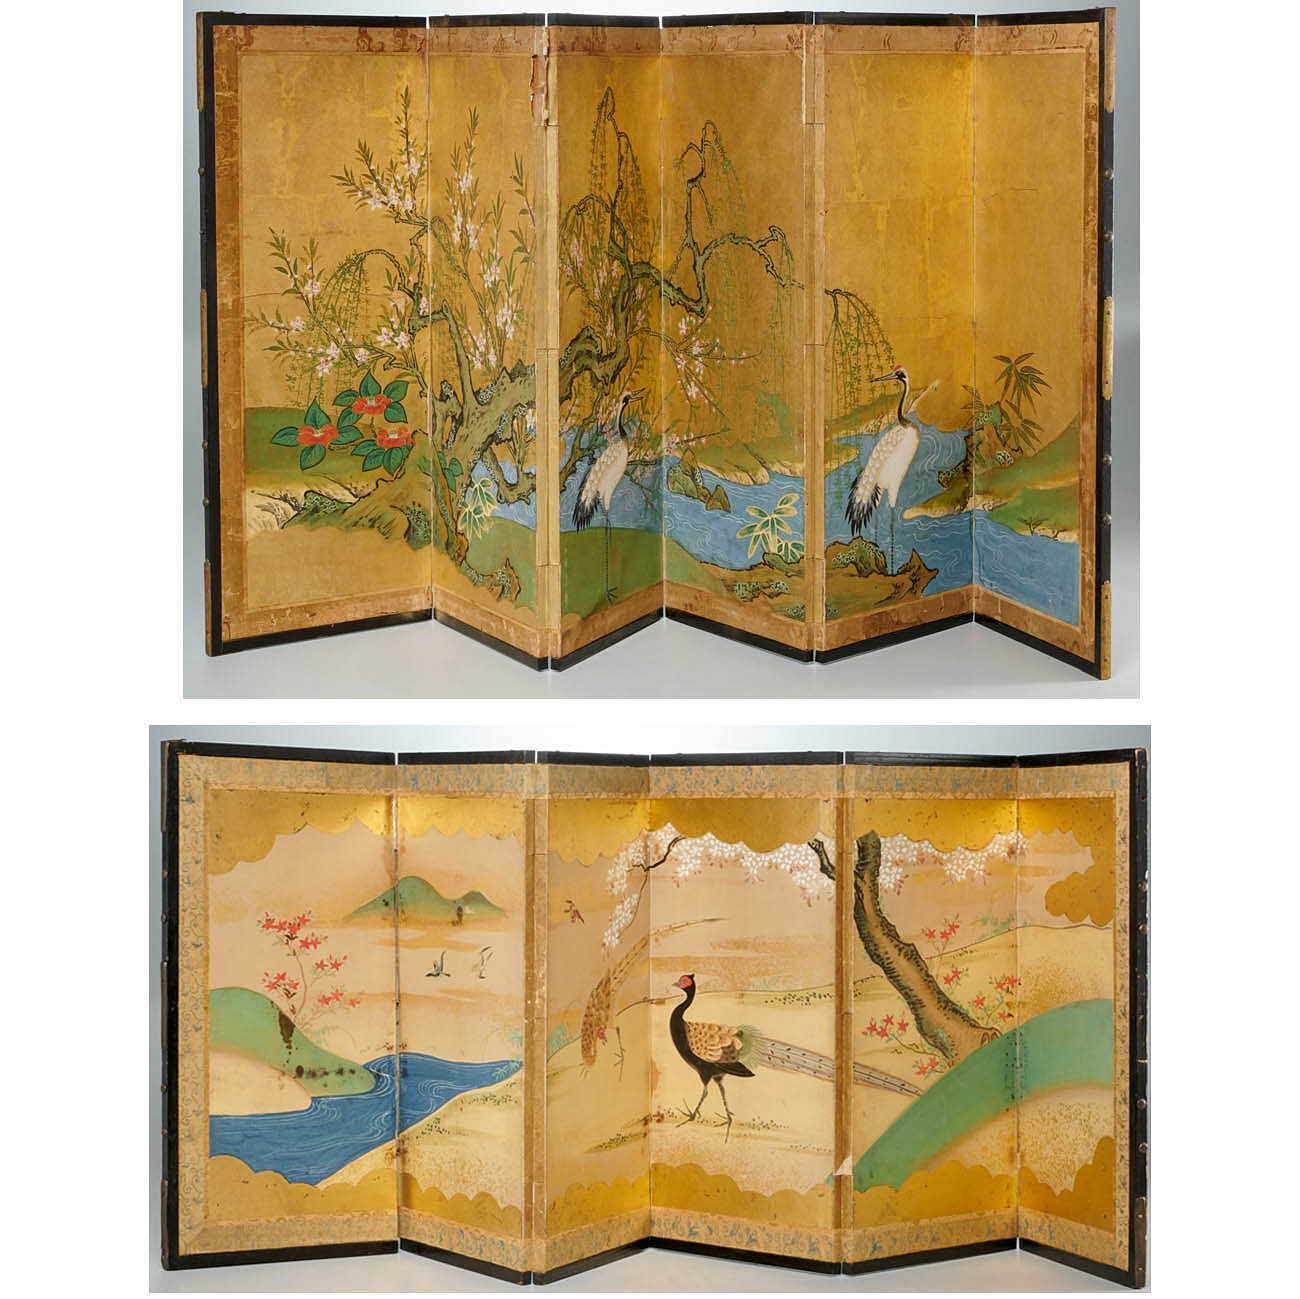  2 JAPANESE 6 PANEL PAINTED SCREENS 361214